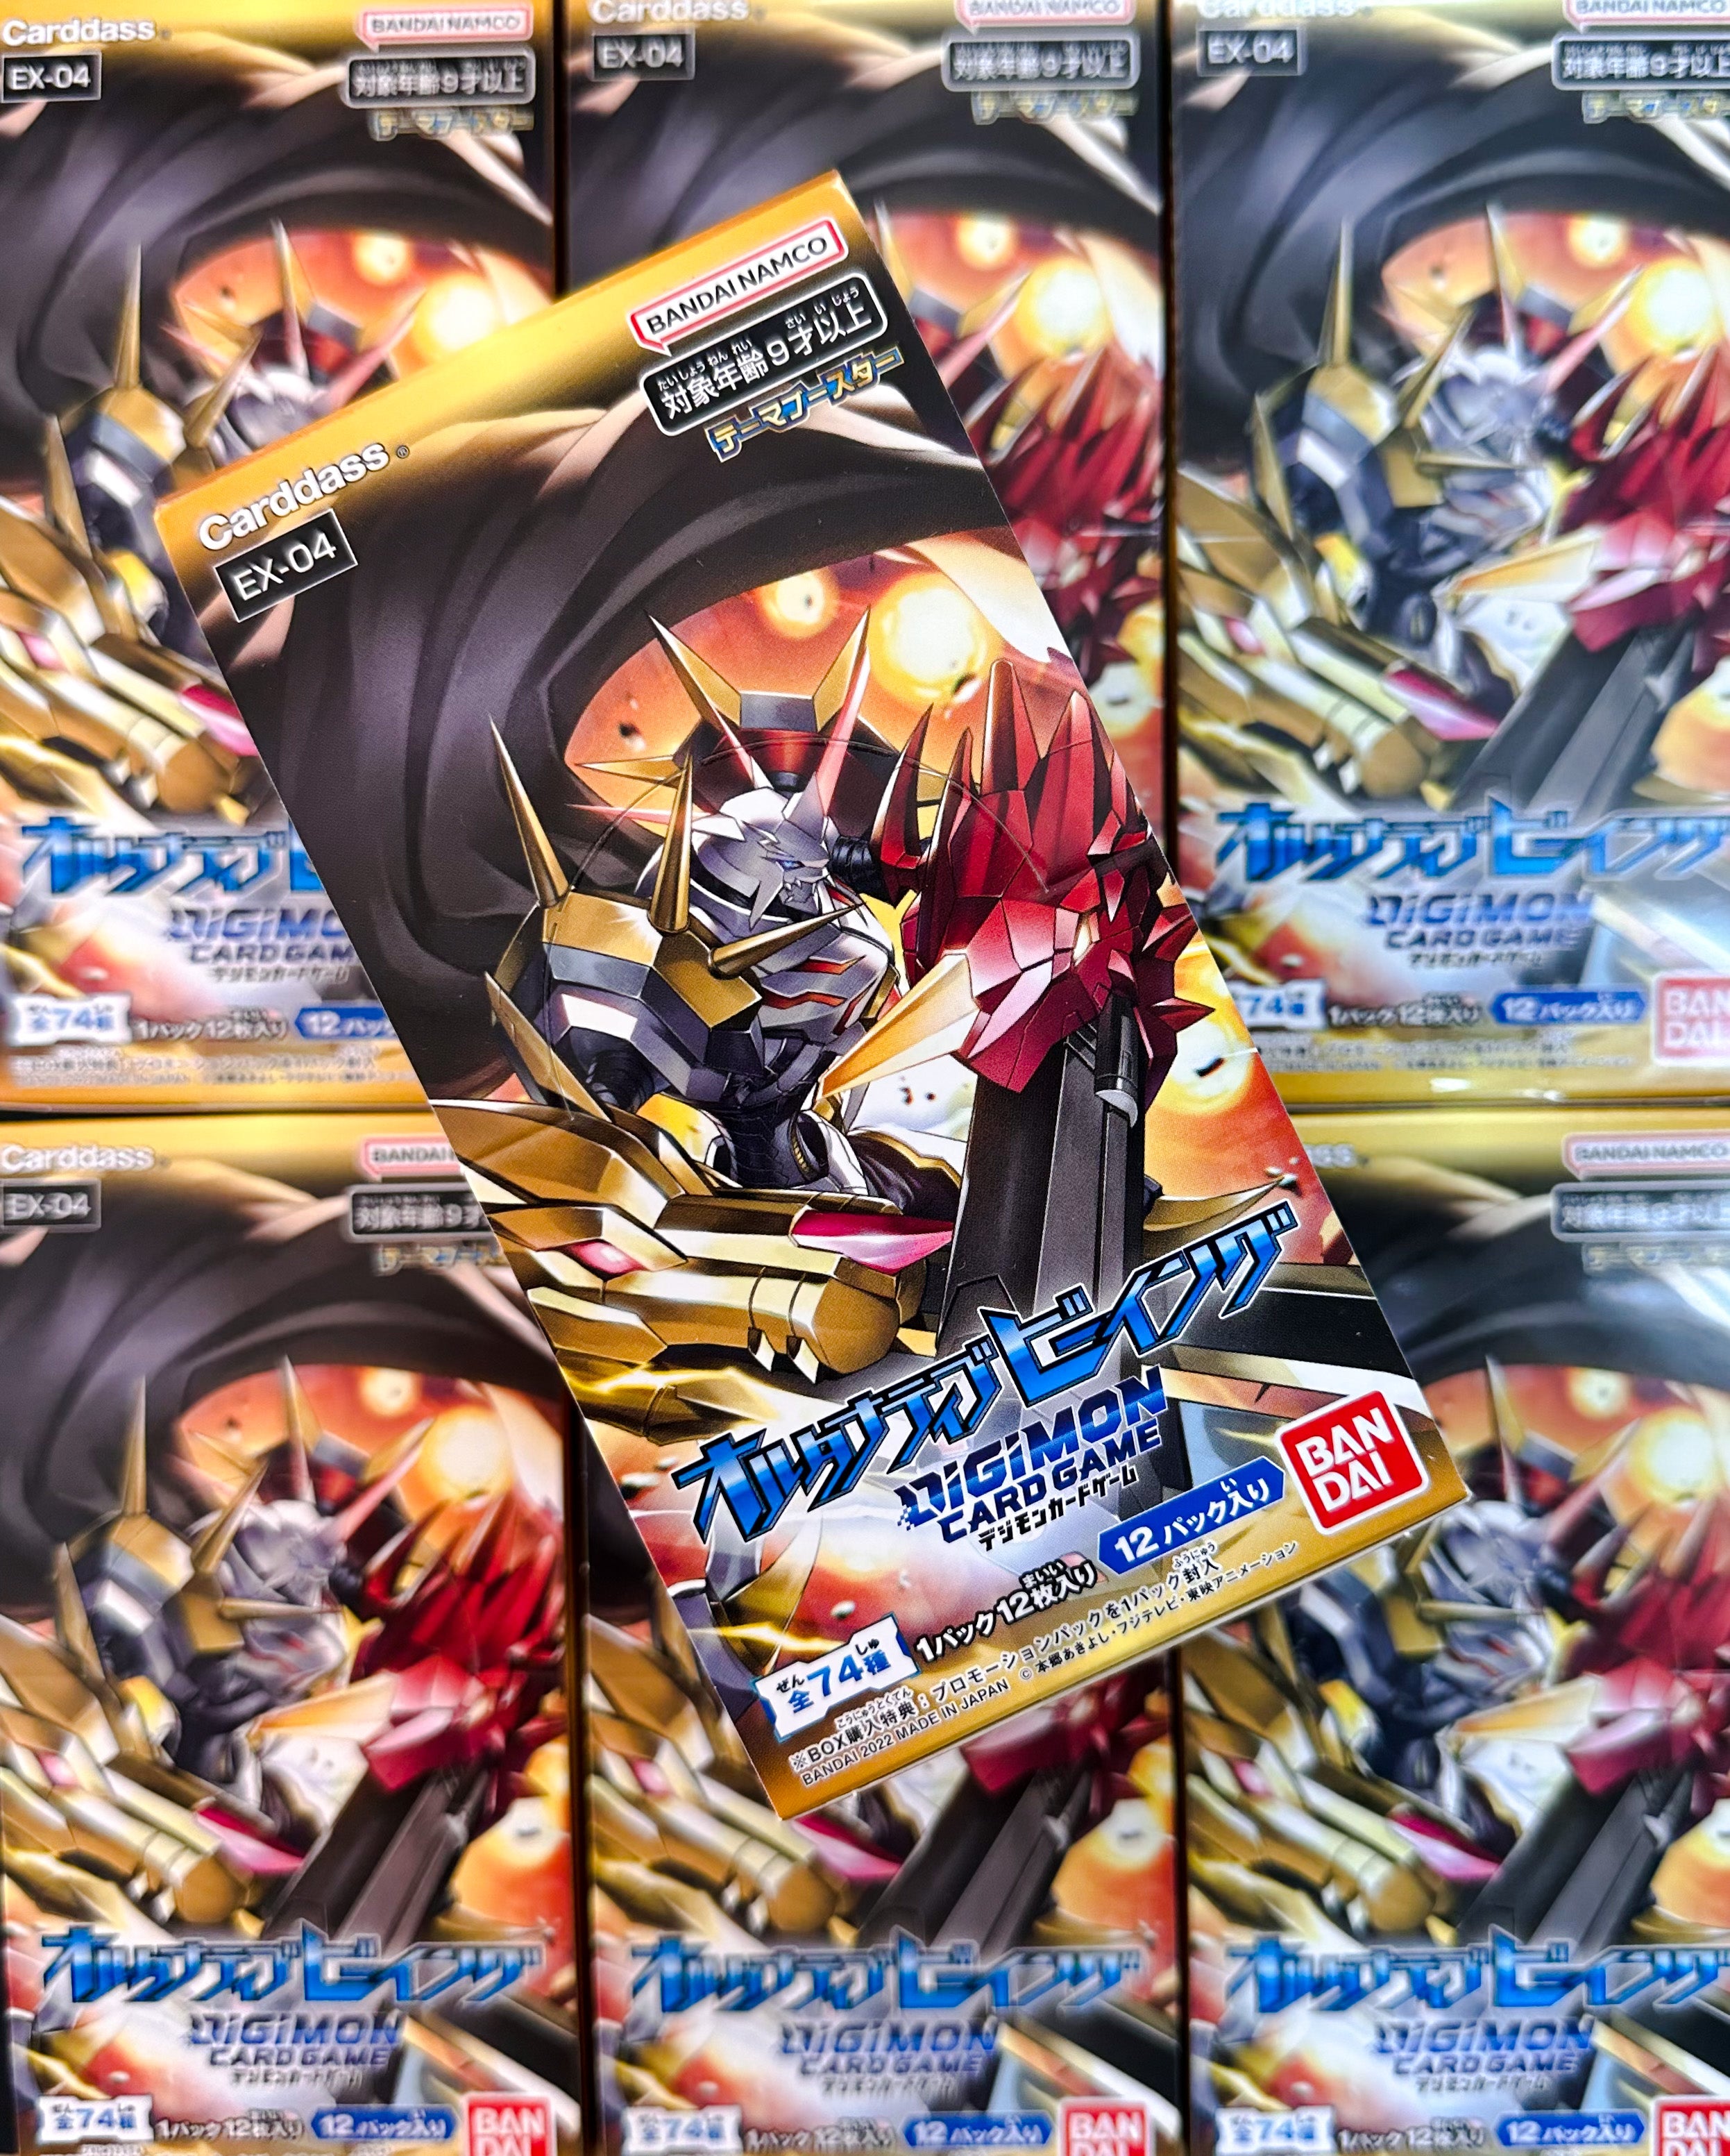 DIGIMON CARD GAME [EX-04] THEME BOOSTER ALTERNATIVE BEING - Box